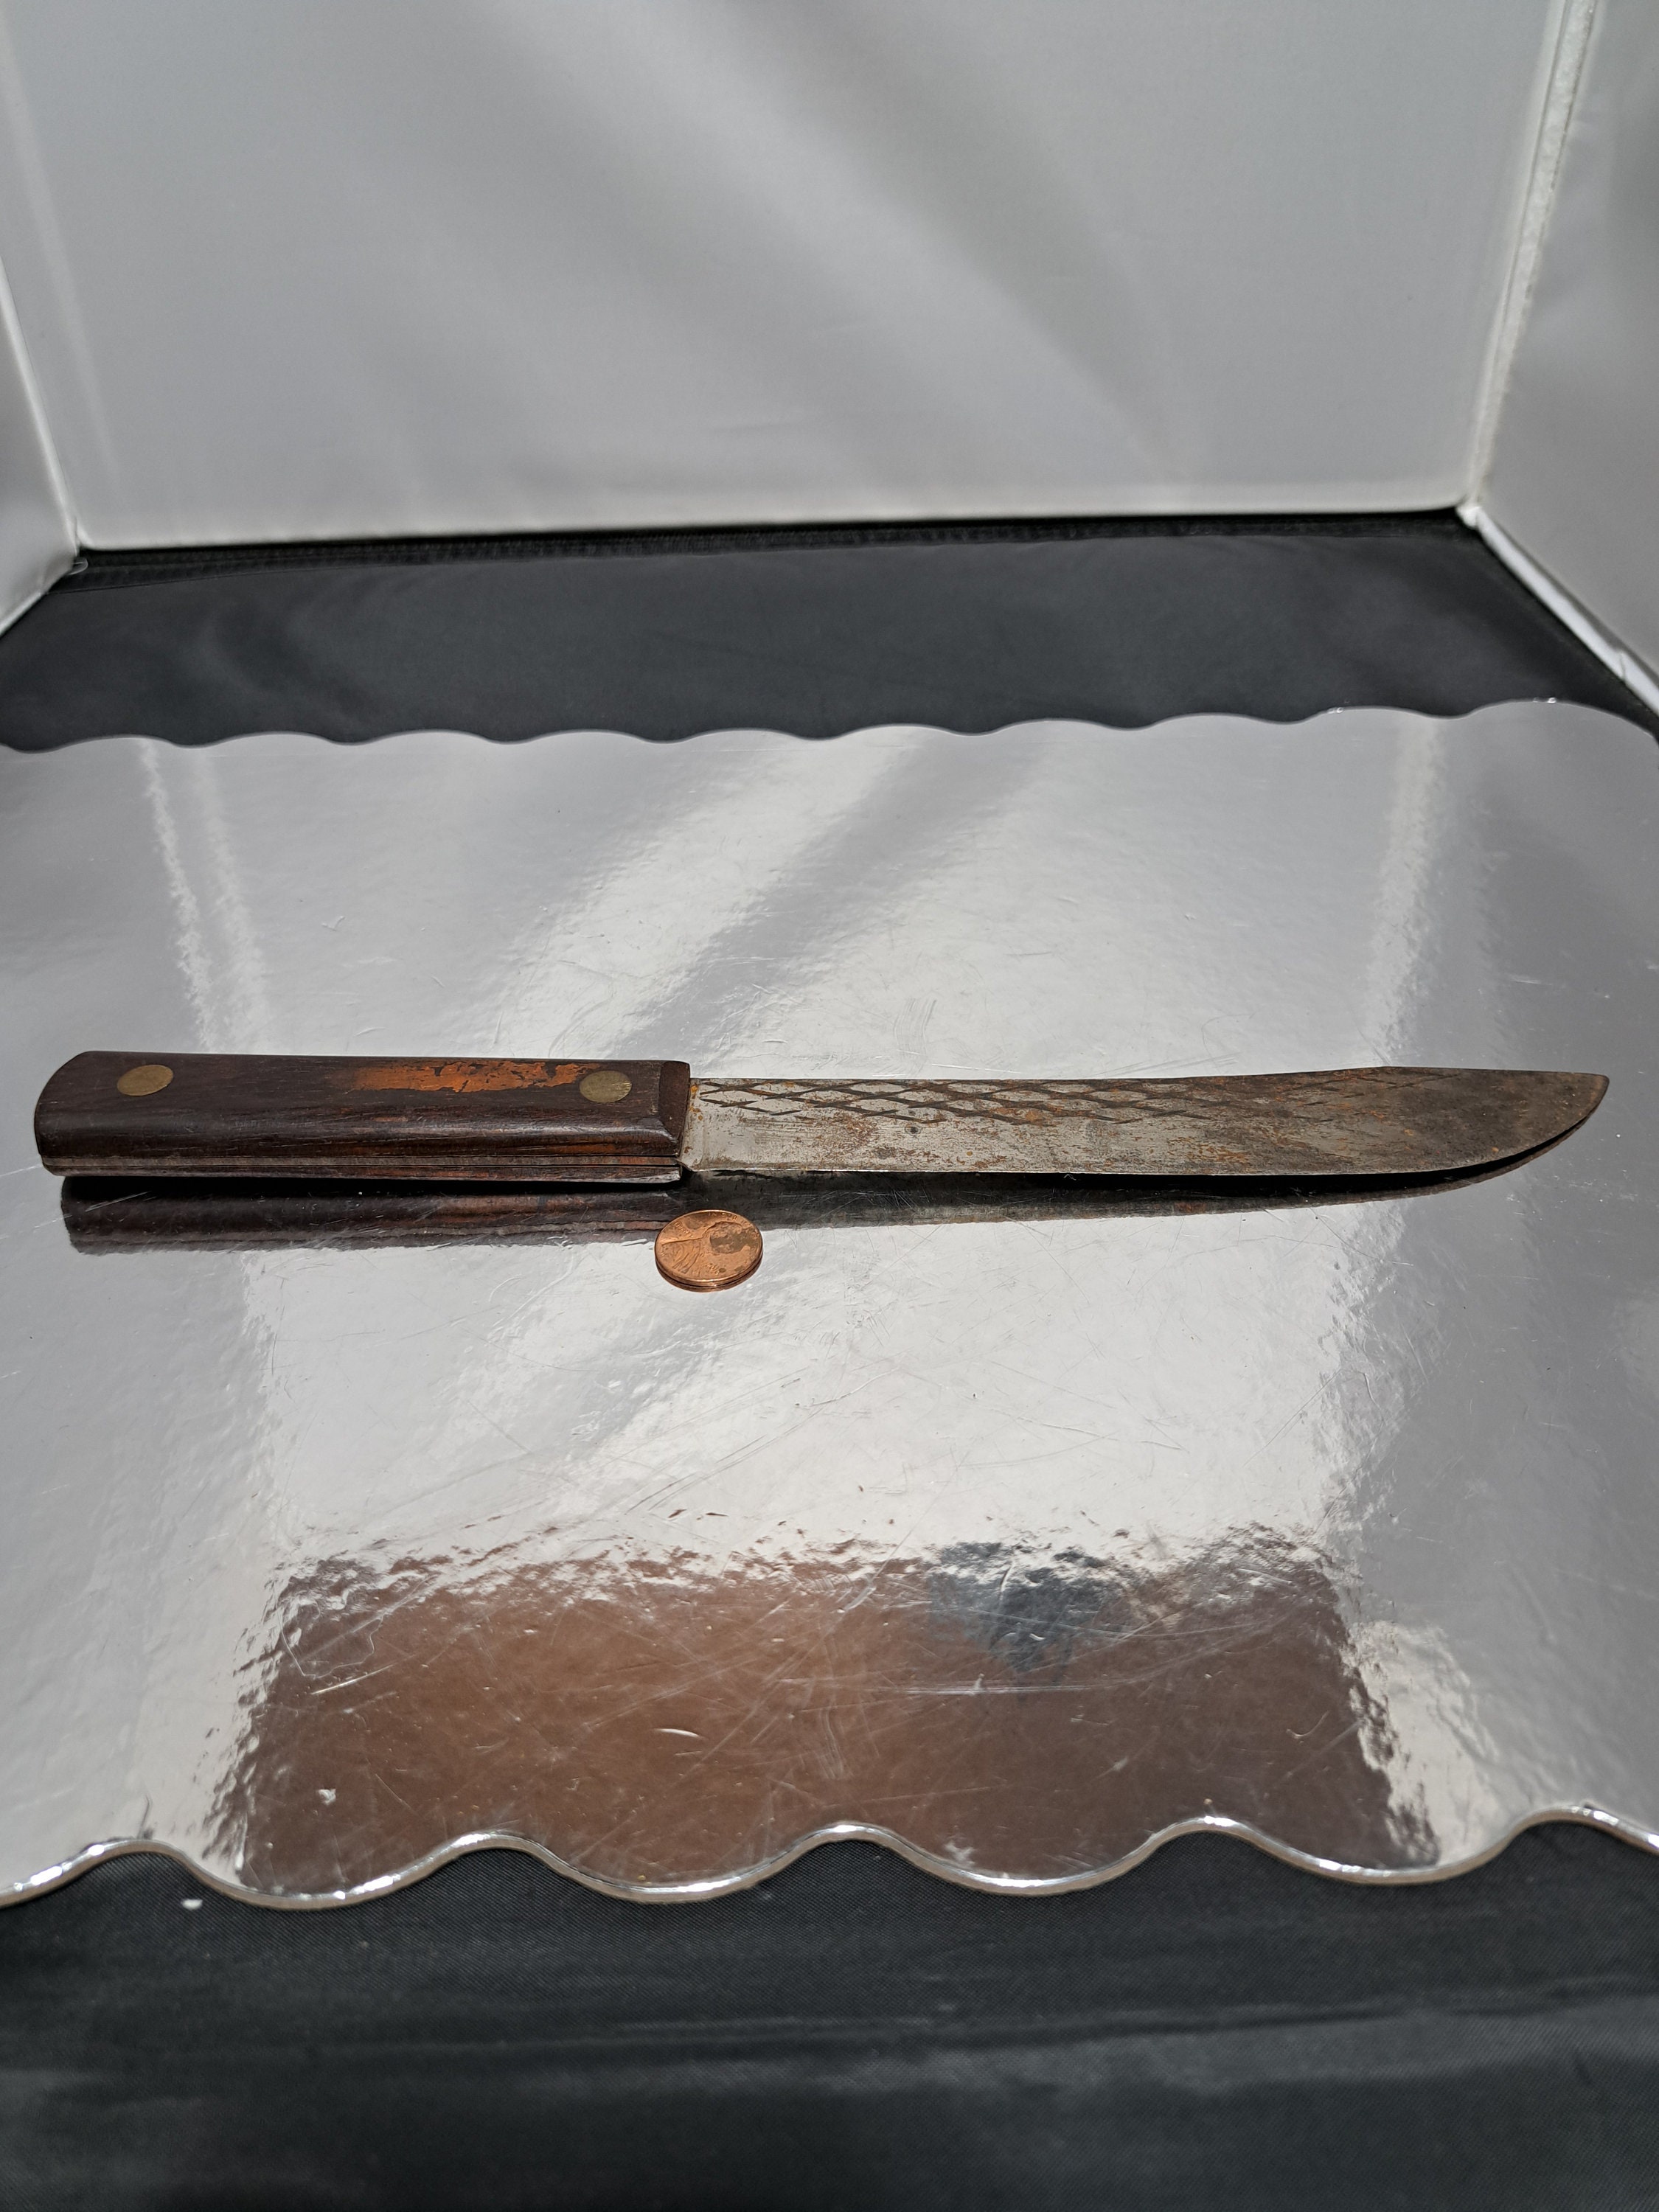 Antique BUTCHER'S KNIFE by A.F. BANNISTER & CO of NEWARK NJ c.19th